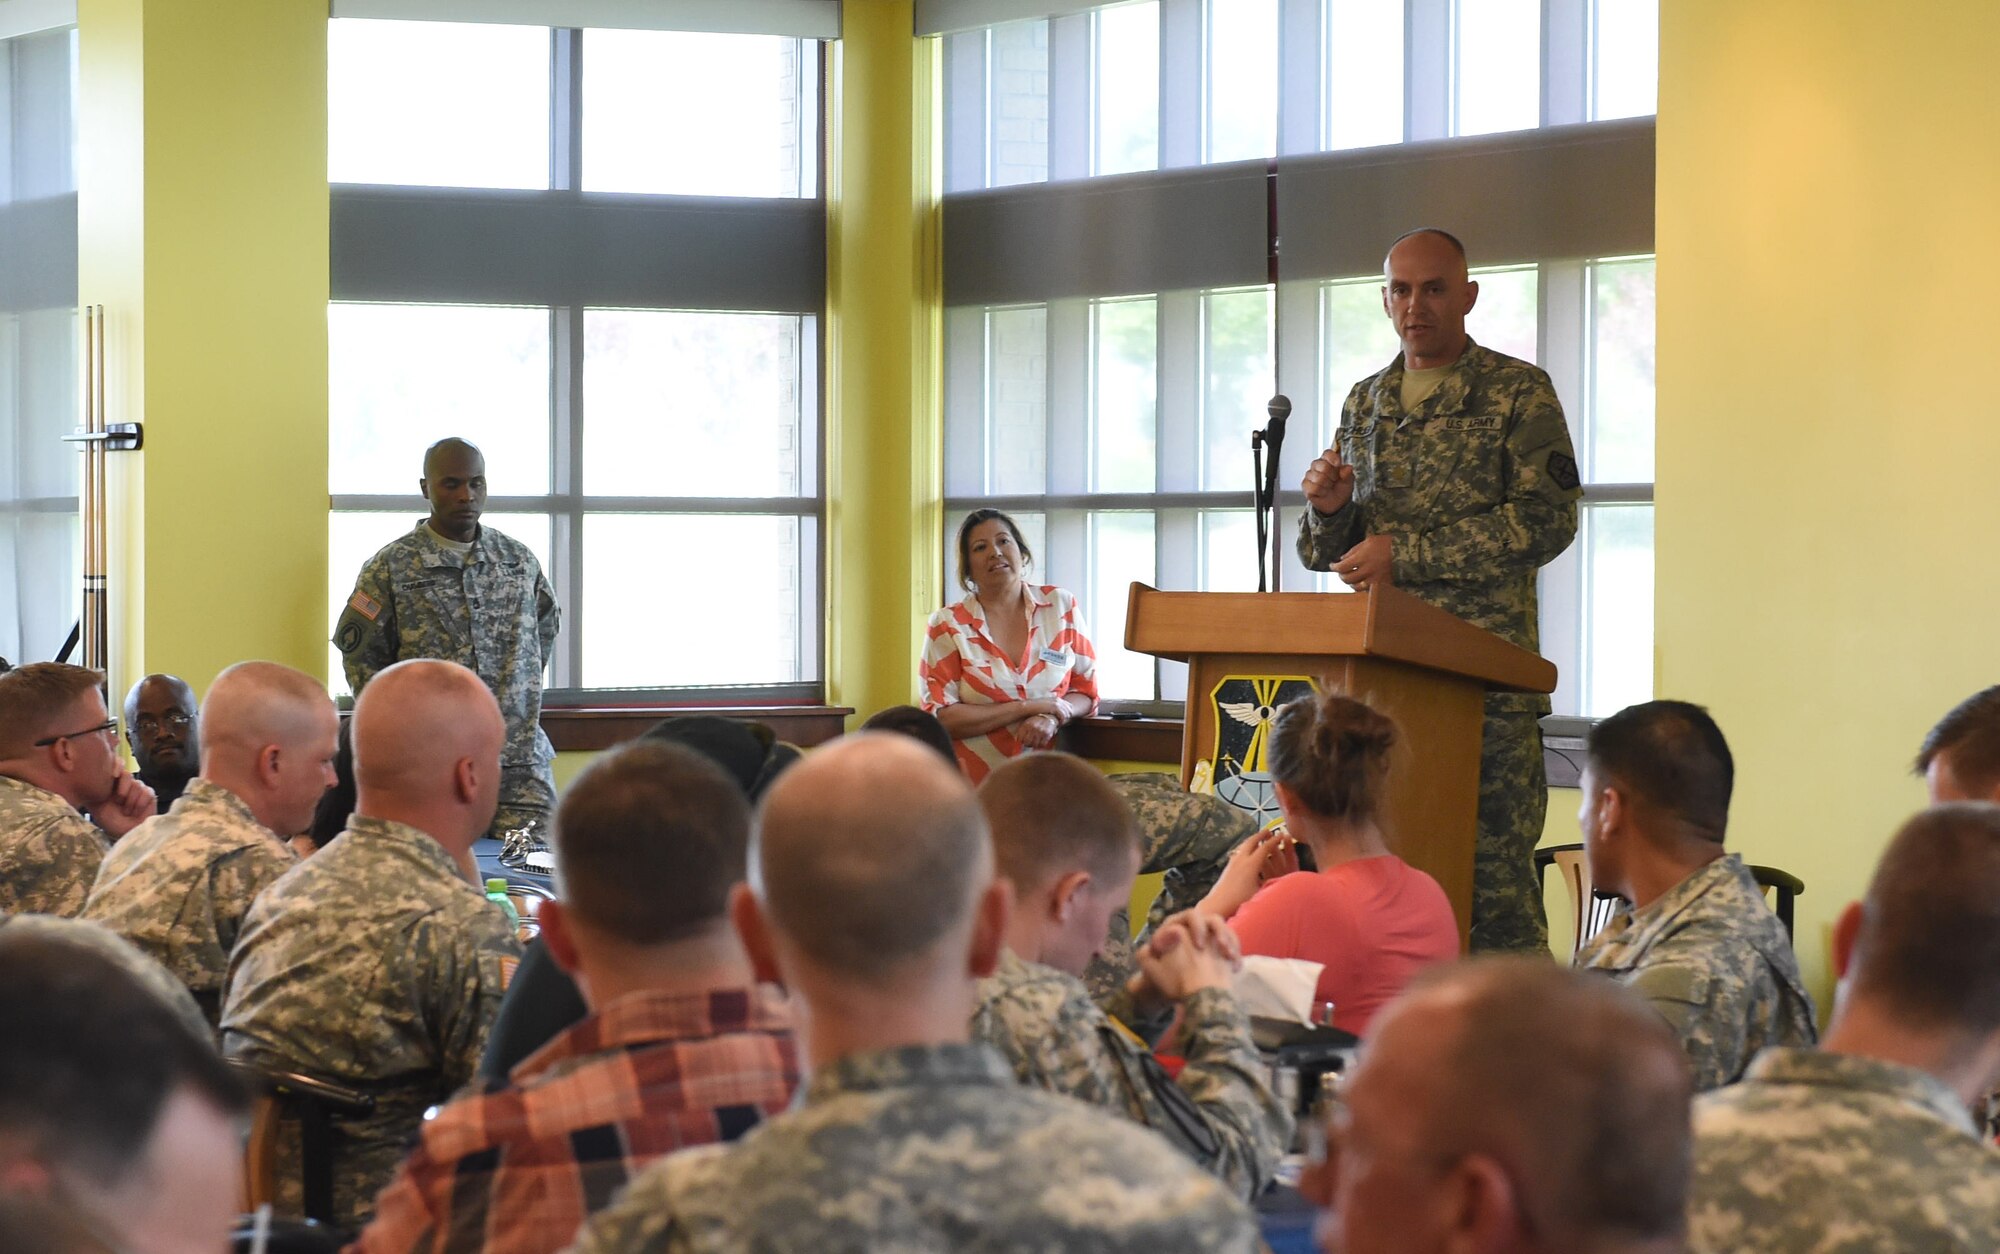 Maj. Jeremy McHugh, 743rd Military Intelligence Battalion member, speaks with U.S. Army members during the Team Buckley Military Heritage Series: Army Salute celebration June 26, 2015, at Panther Den on Buckley Air Force Base, Colo. The Army Salute, which included displays, brief presentations and free food, was held to celebrate the Army’s 240th birthday and its history on Buckley AFB. (U.S. Air Force photo by Airman 1st Class Samantha Meadors/Released)